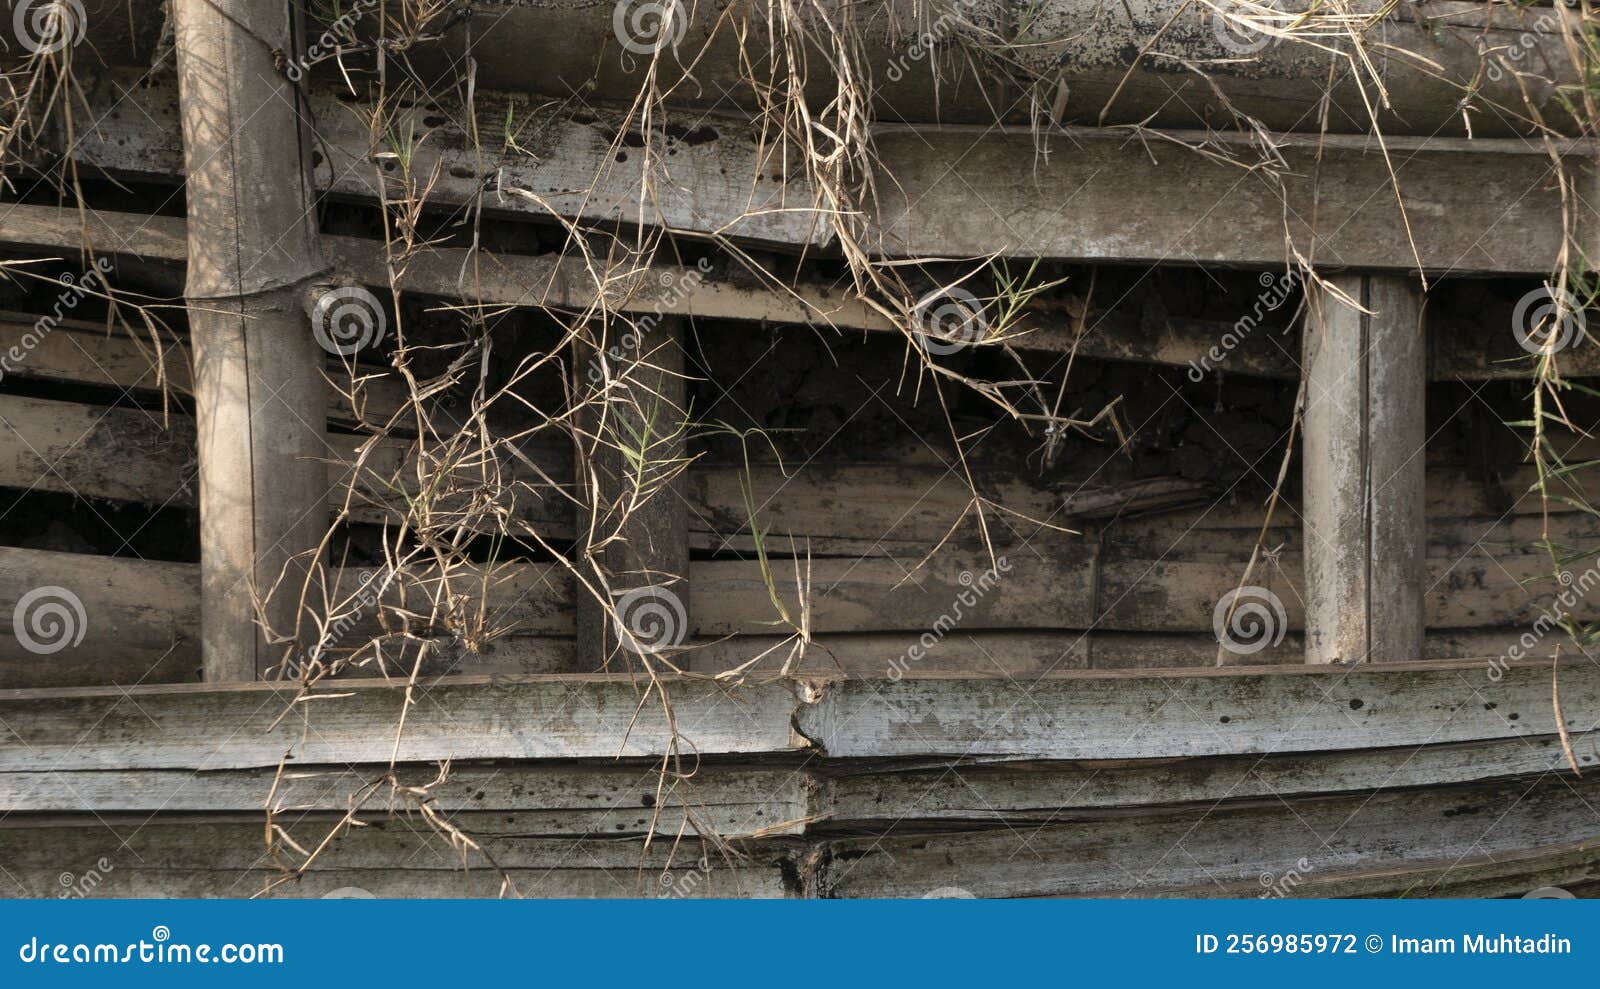 woven bamboo, retaining the soil of the rice fields so as not to erode